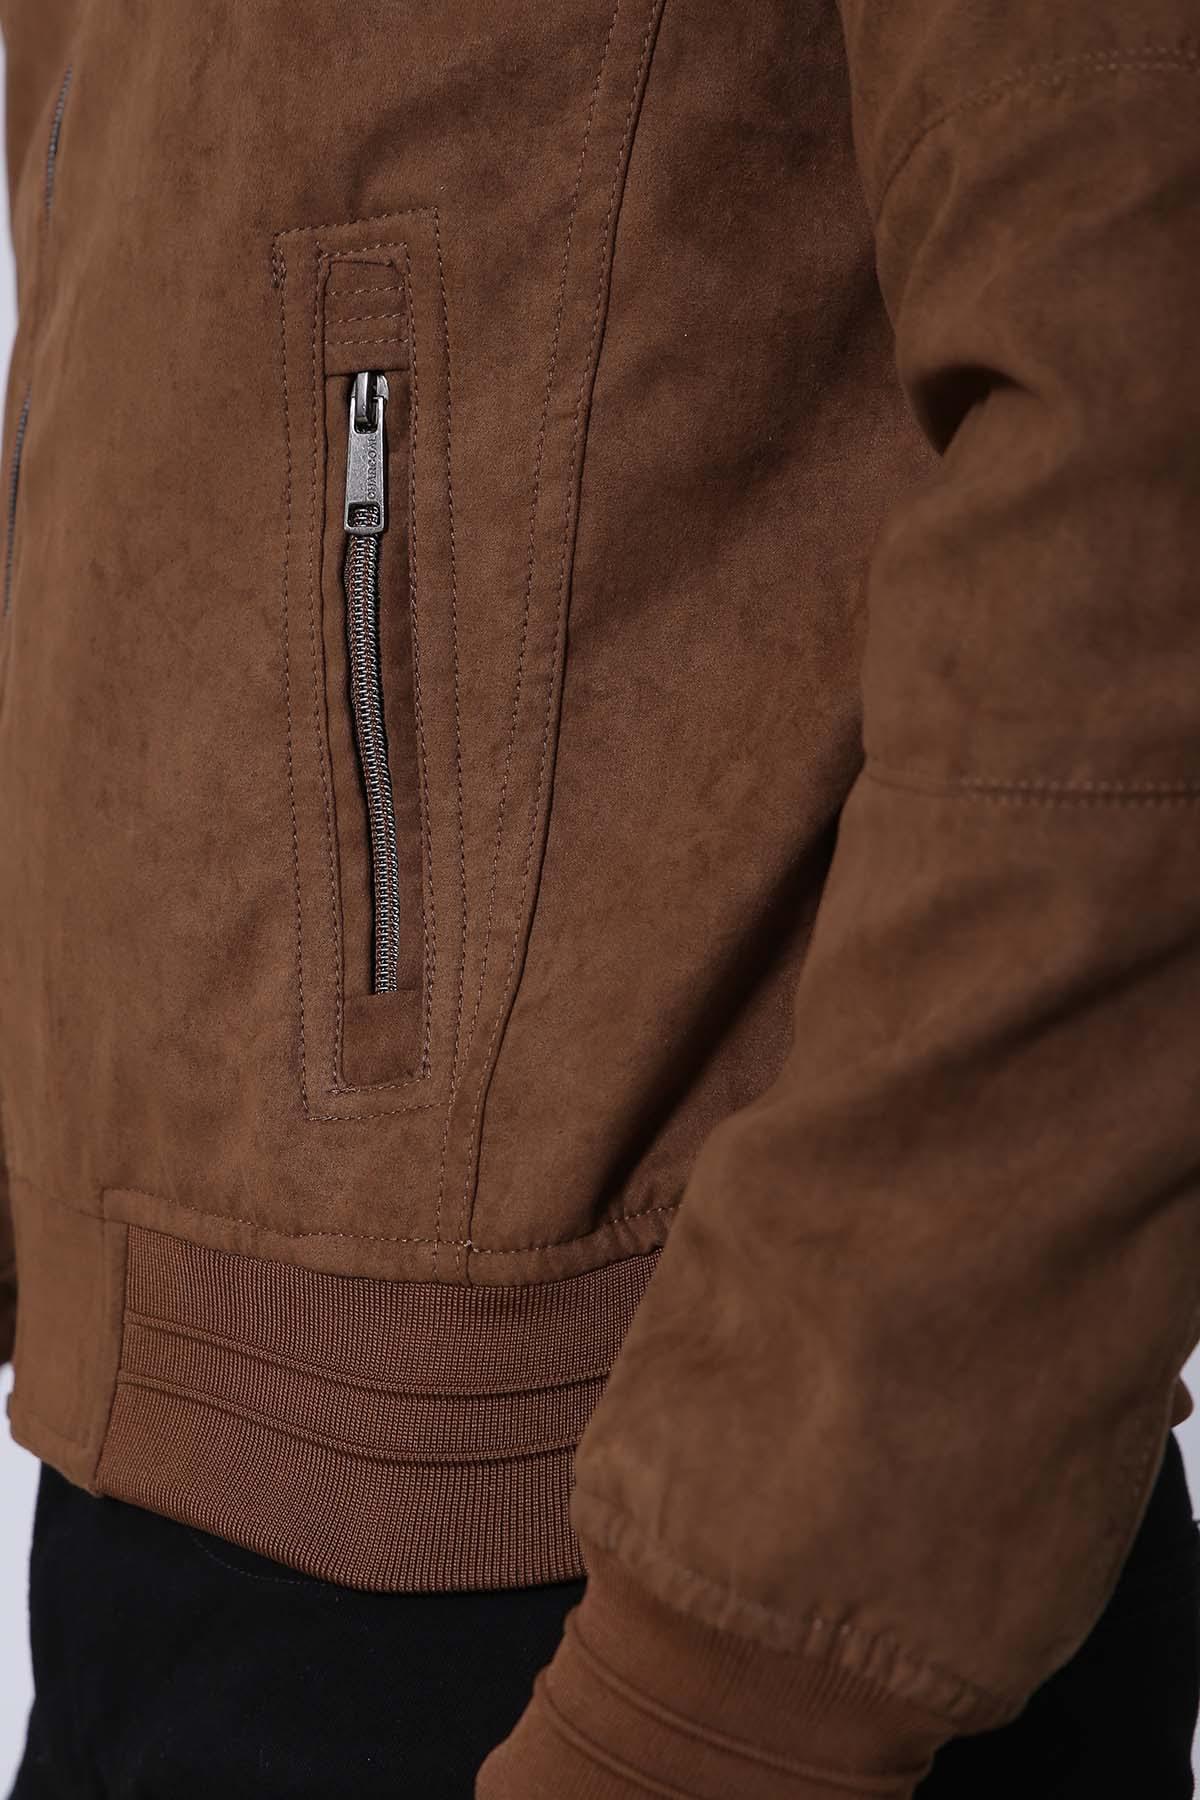 JACKET FULL SLEEVE BROWN at Charcoal Clothing